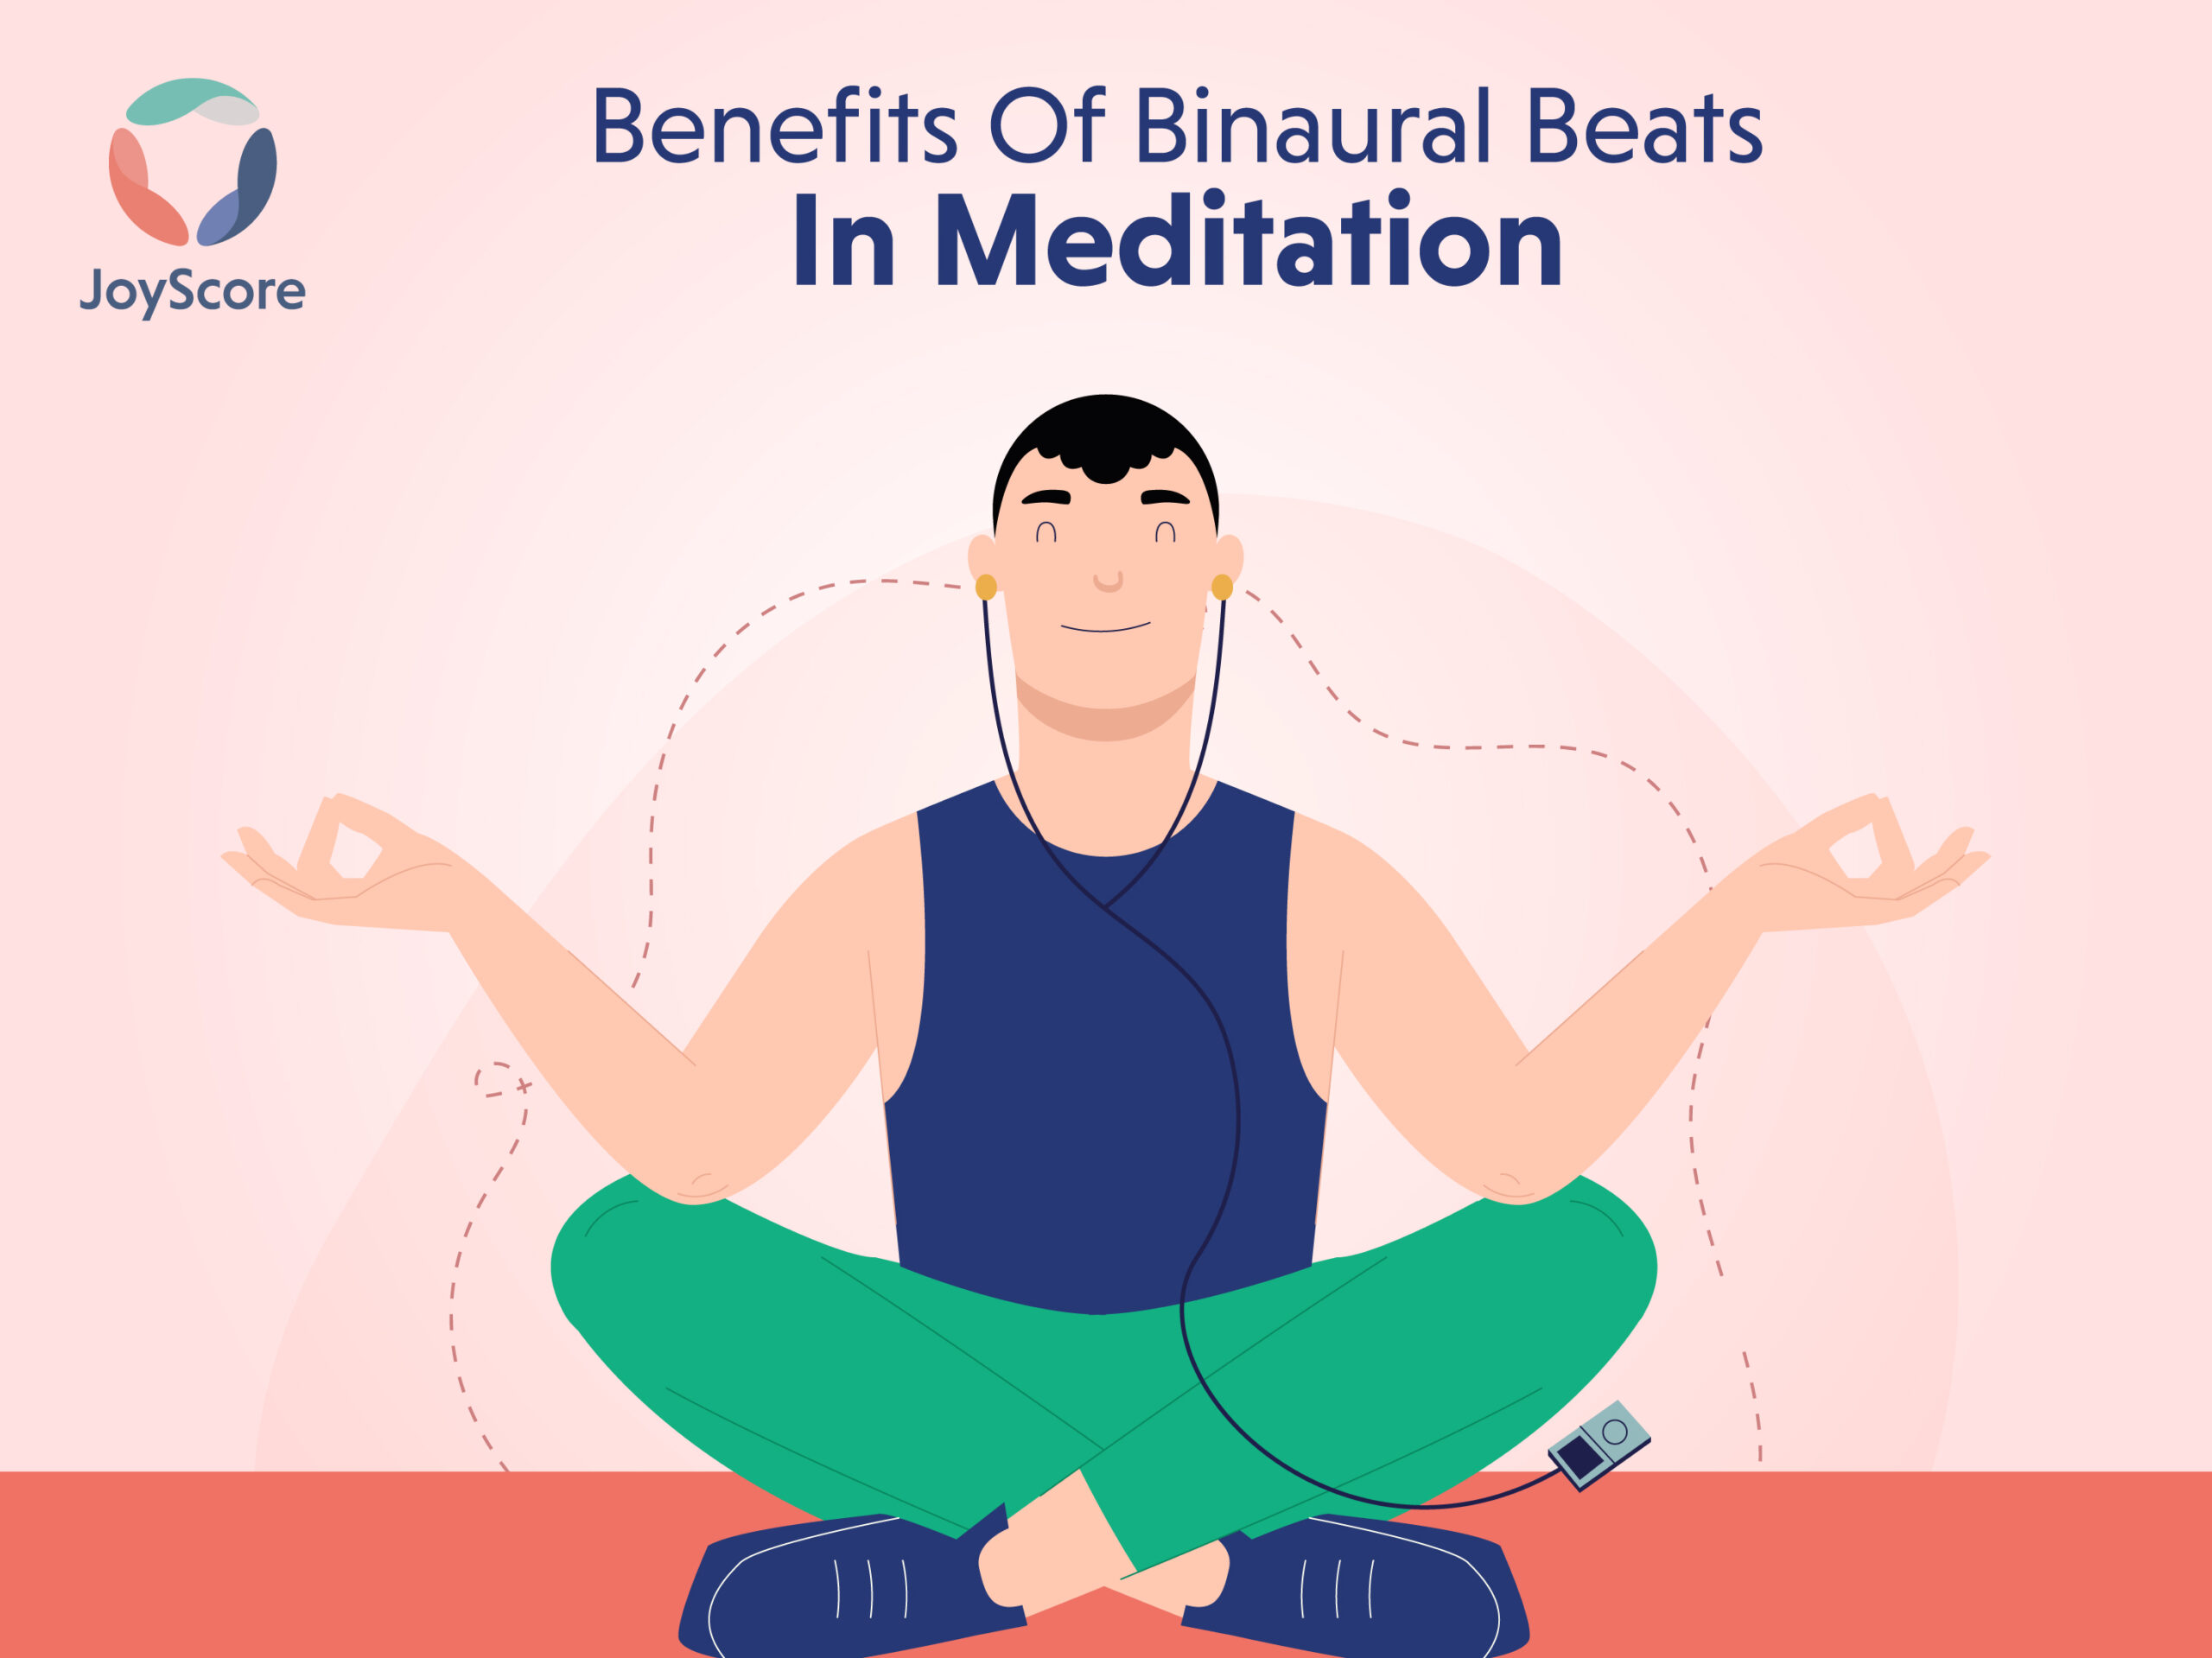 7 Amazing benefits of binaural beats which you did not know